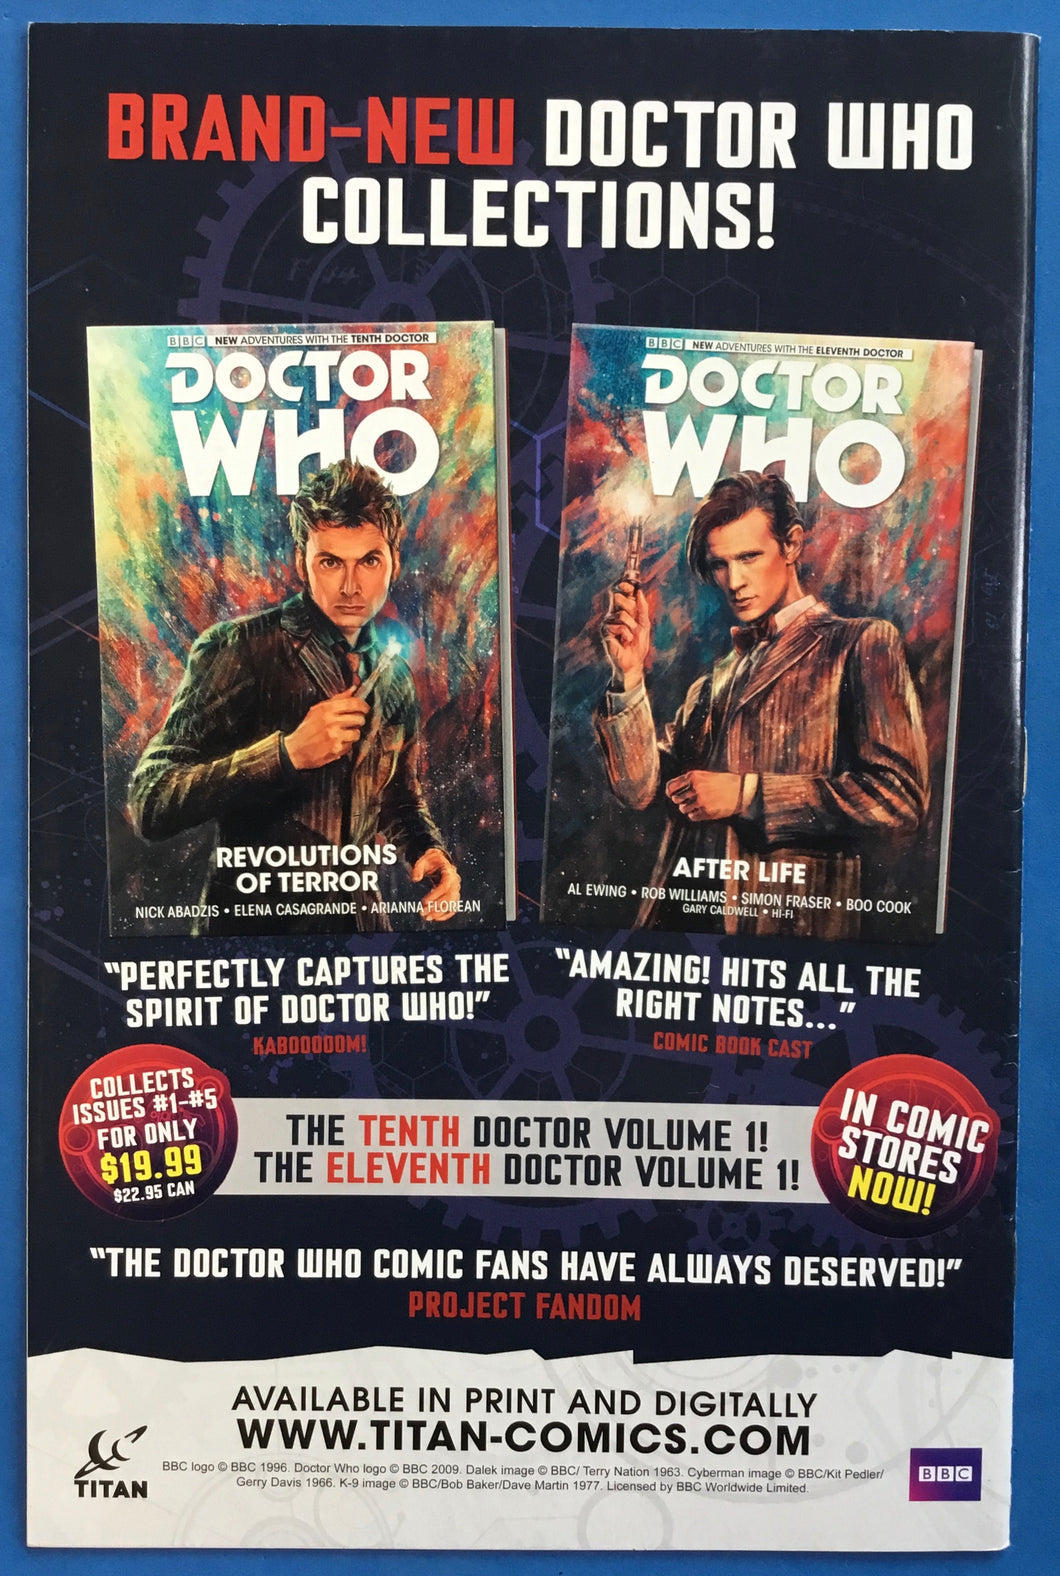 Doctor Who: The Tenth Doctor No. #12(A) 2015 Titan Comics